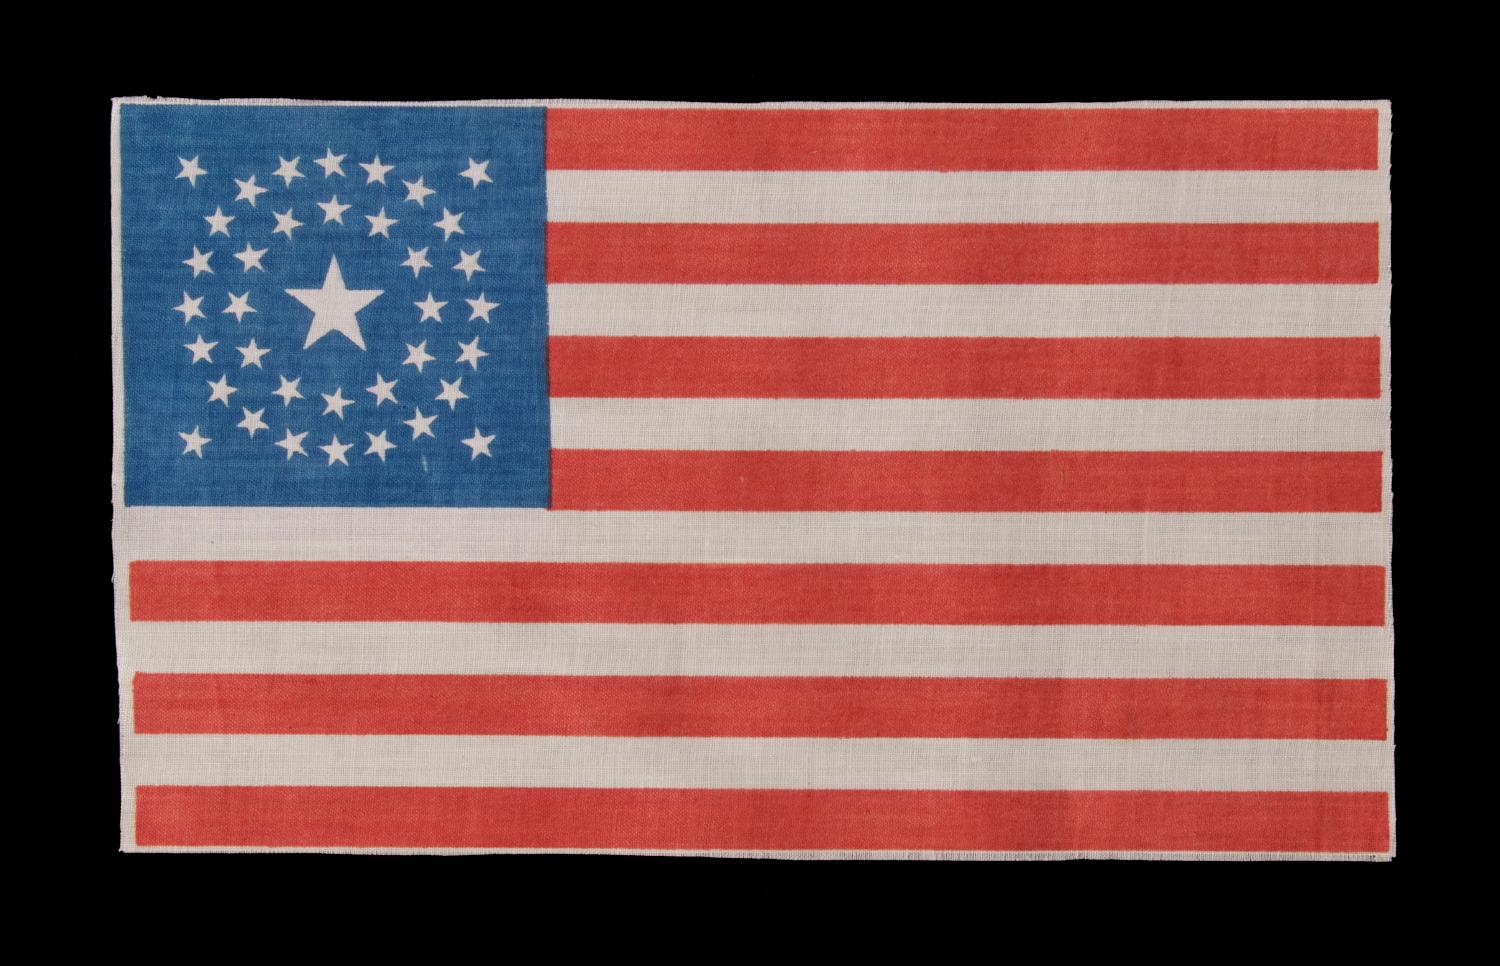 37 STAR ANTIQUE AMERICAN FLAG WITH A DOUBLE-WREATH CONFIGURATION, PROBABLY MADE FOR THE CELEBRATION OF THE CENTENNIAL OF AMERICAN INDEPENDENCE IN 1876, REFLECTS THE TIME DURING WHICH NEBRASKA WAS THE MOST RECENT STATE TO JOIN THE UNION:

37 star